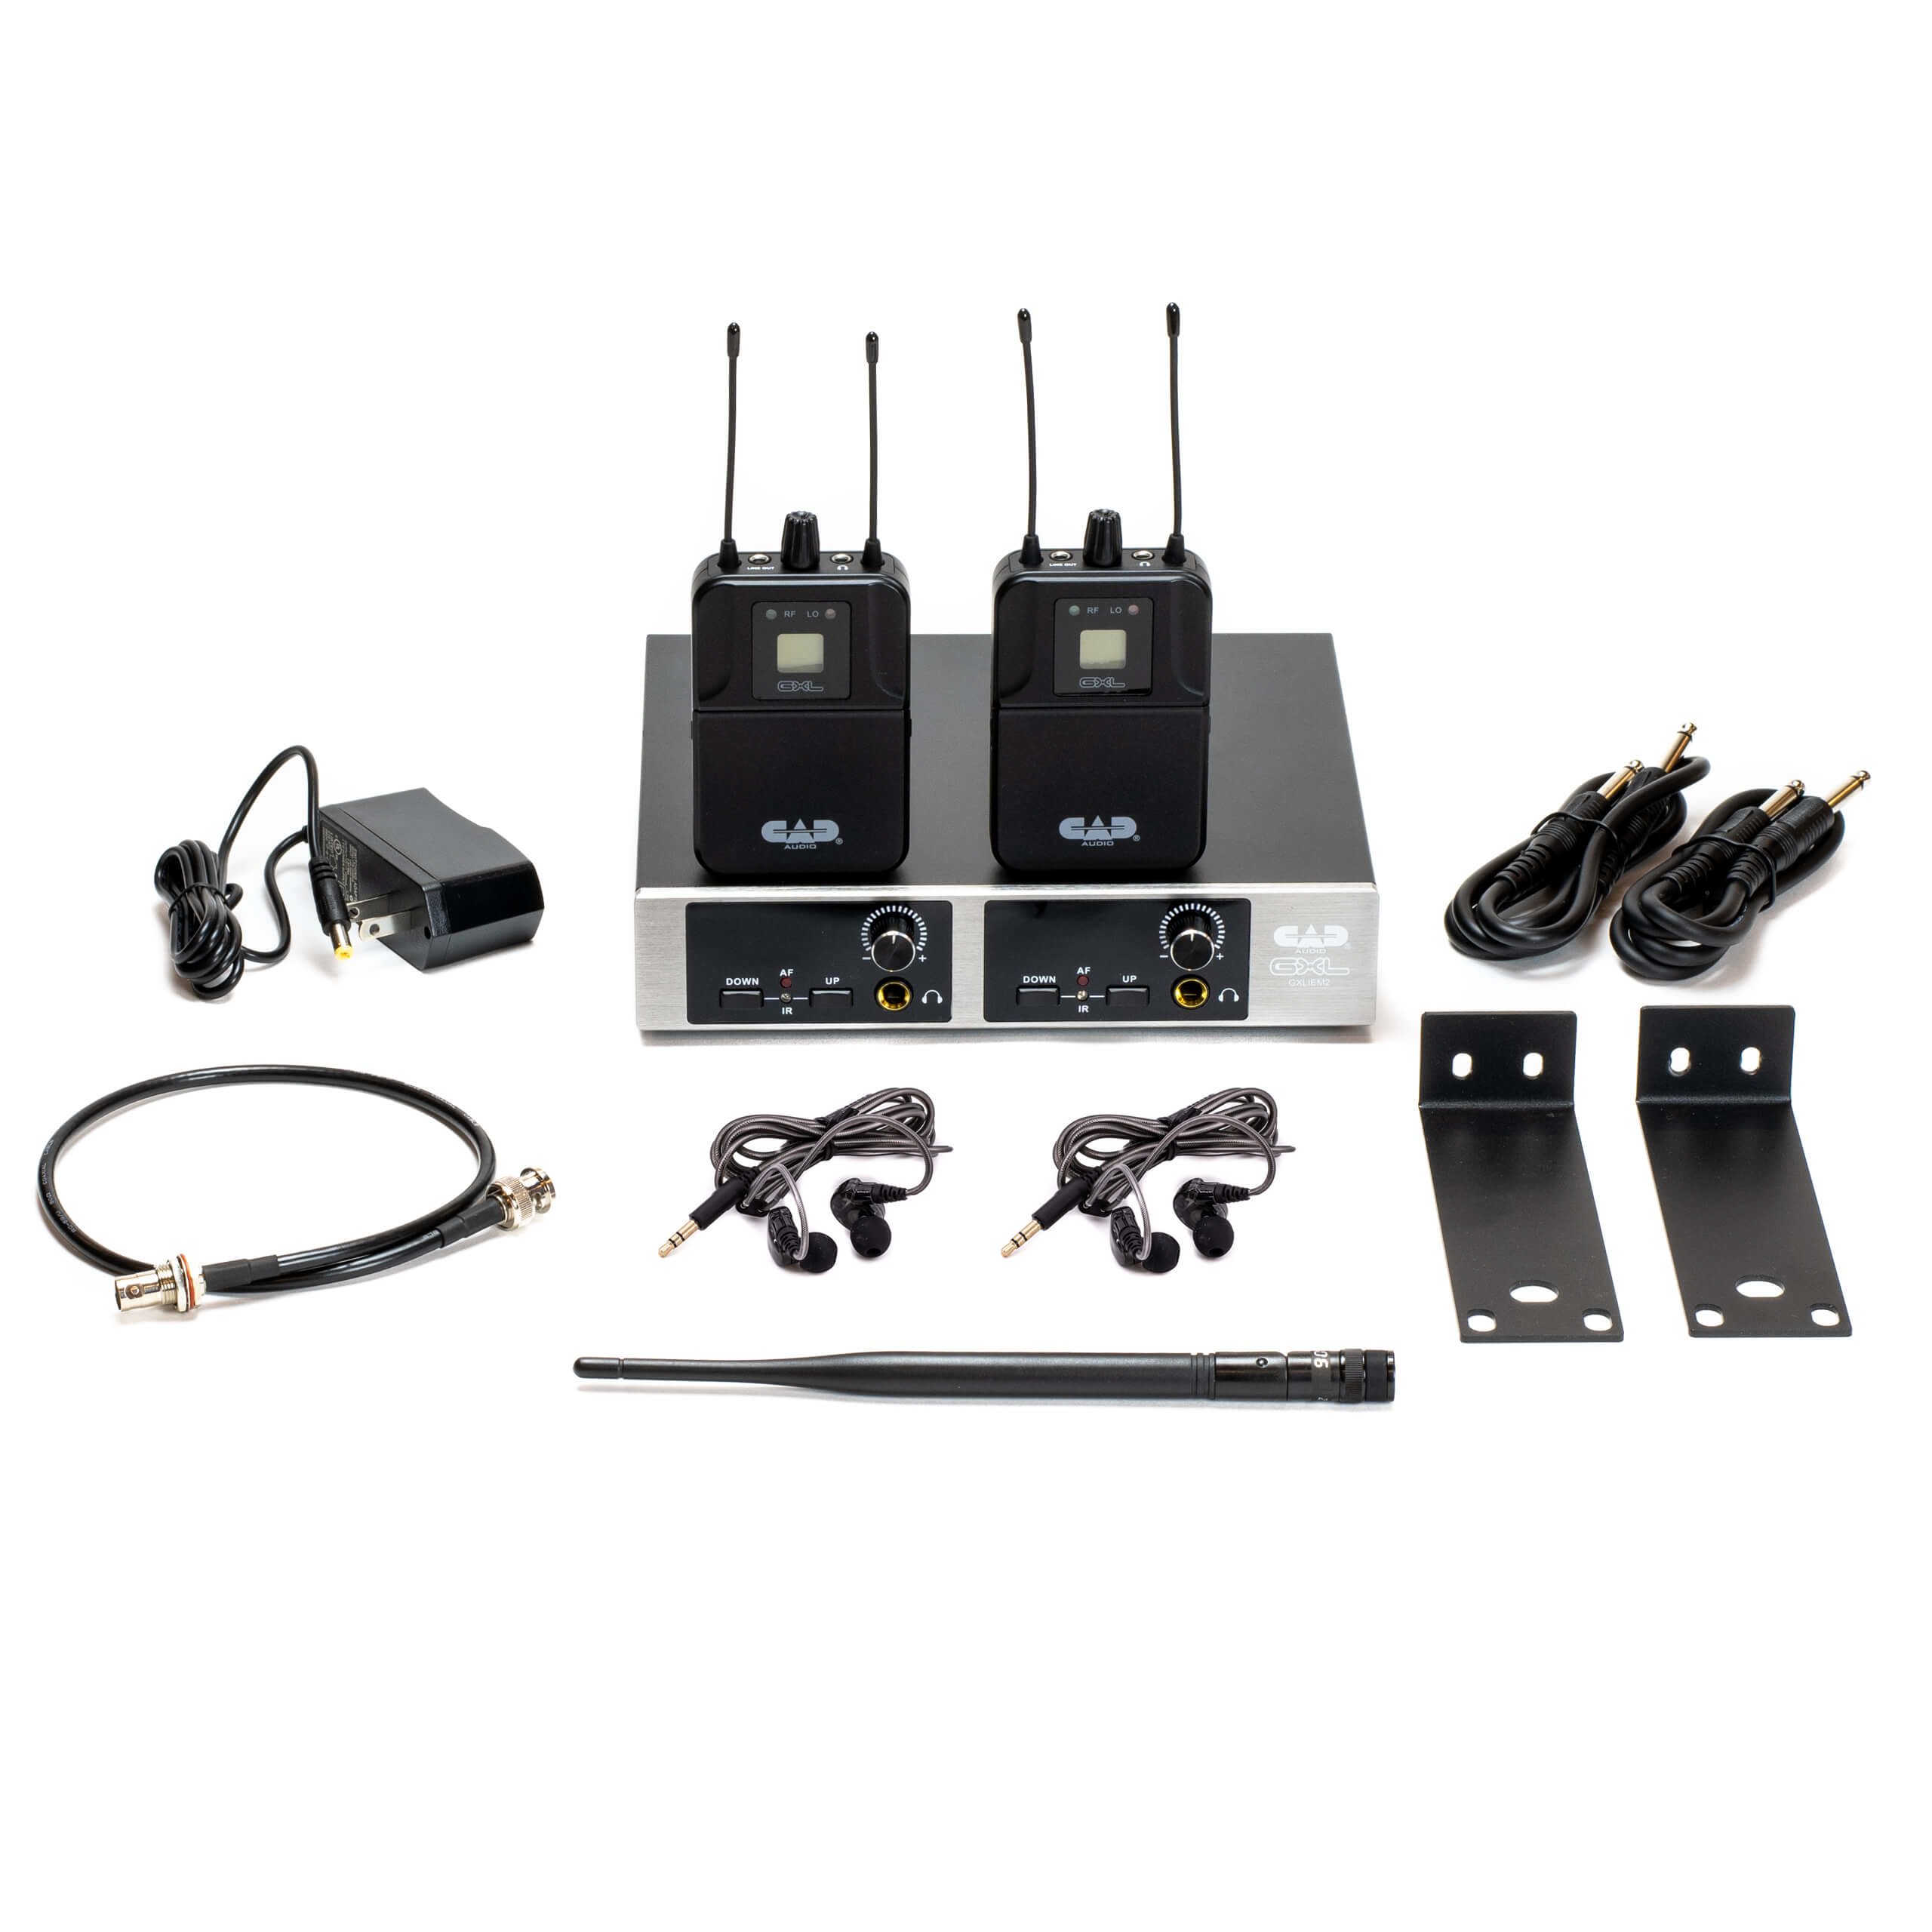 CAD Audio GXLIEM2 - Dual Mix 900 MHz Wireless In-Ear Monitor System